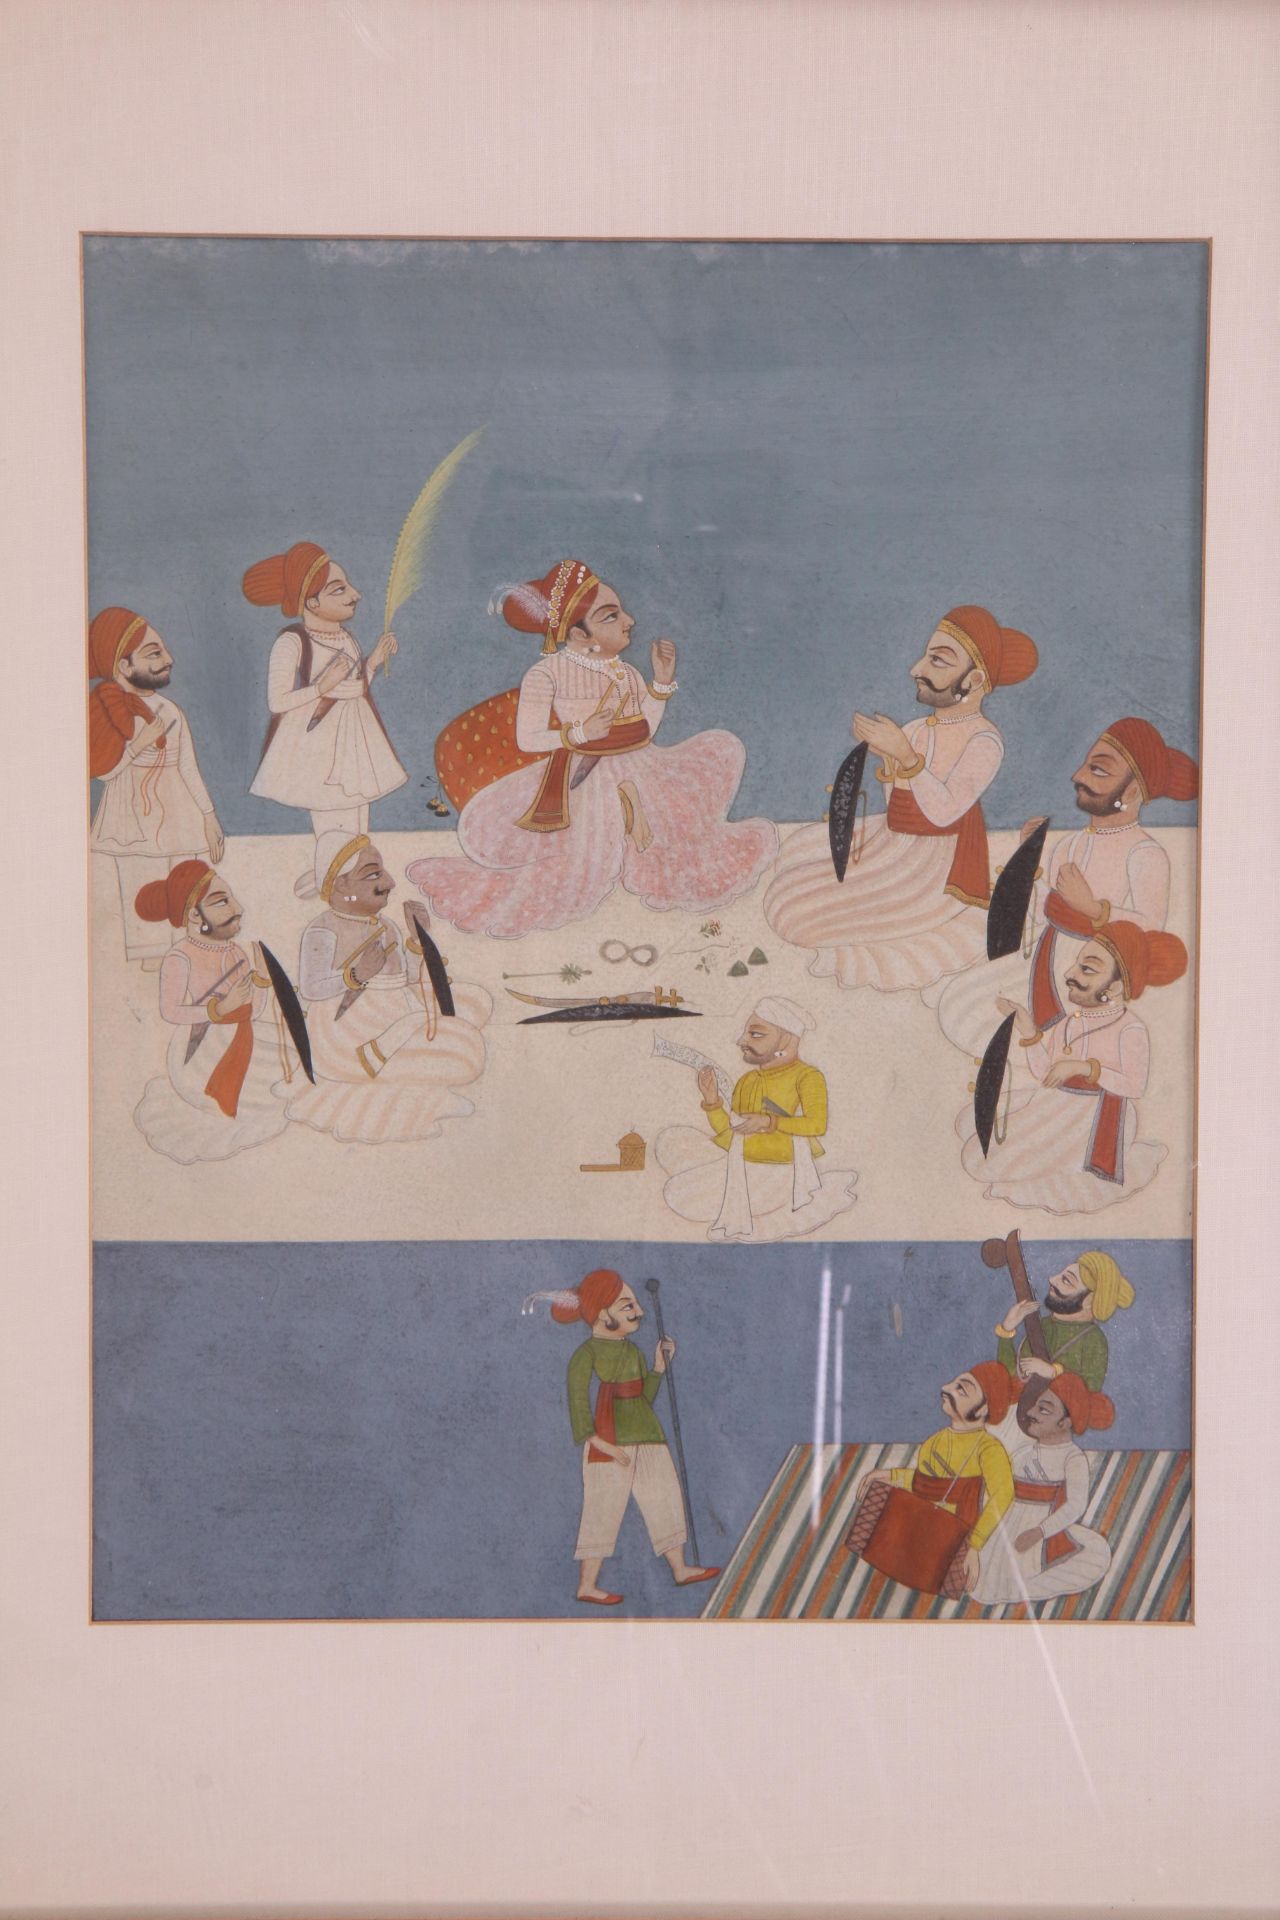 India, Rajasthan, prent `The King and Attendants´, 18e eeuw. - Bild 2 aus 2